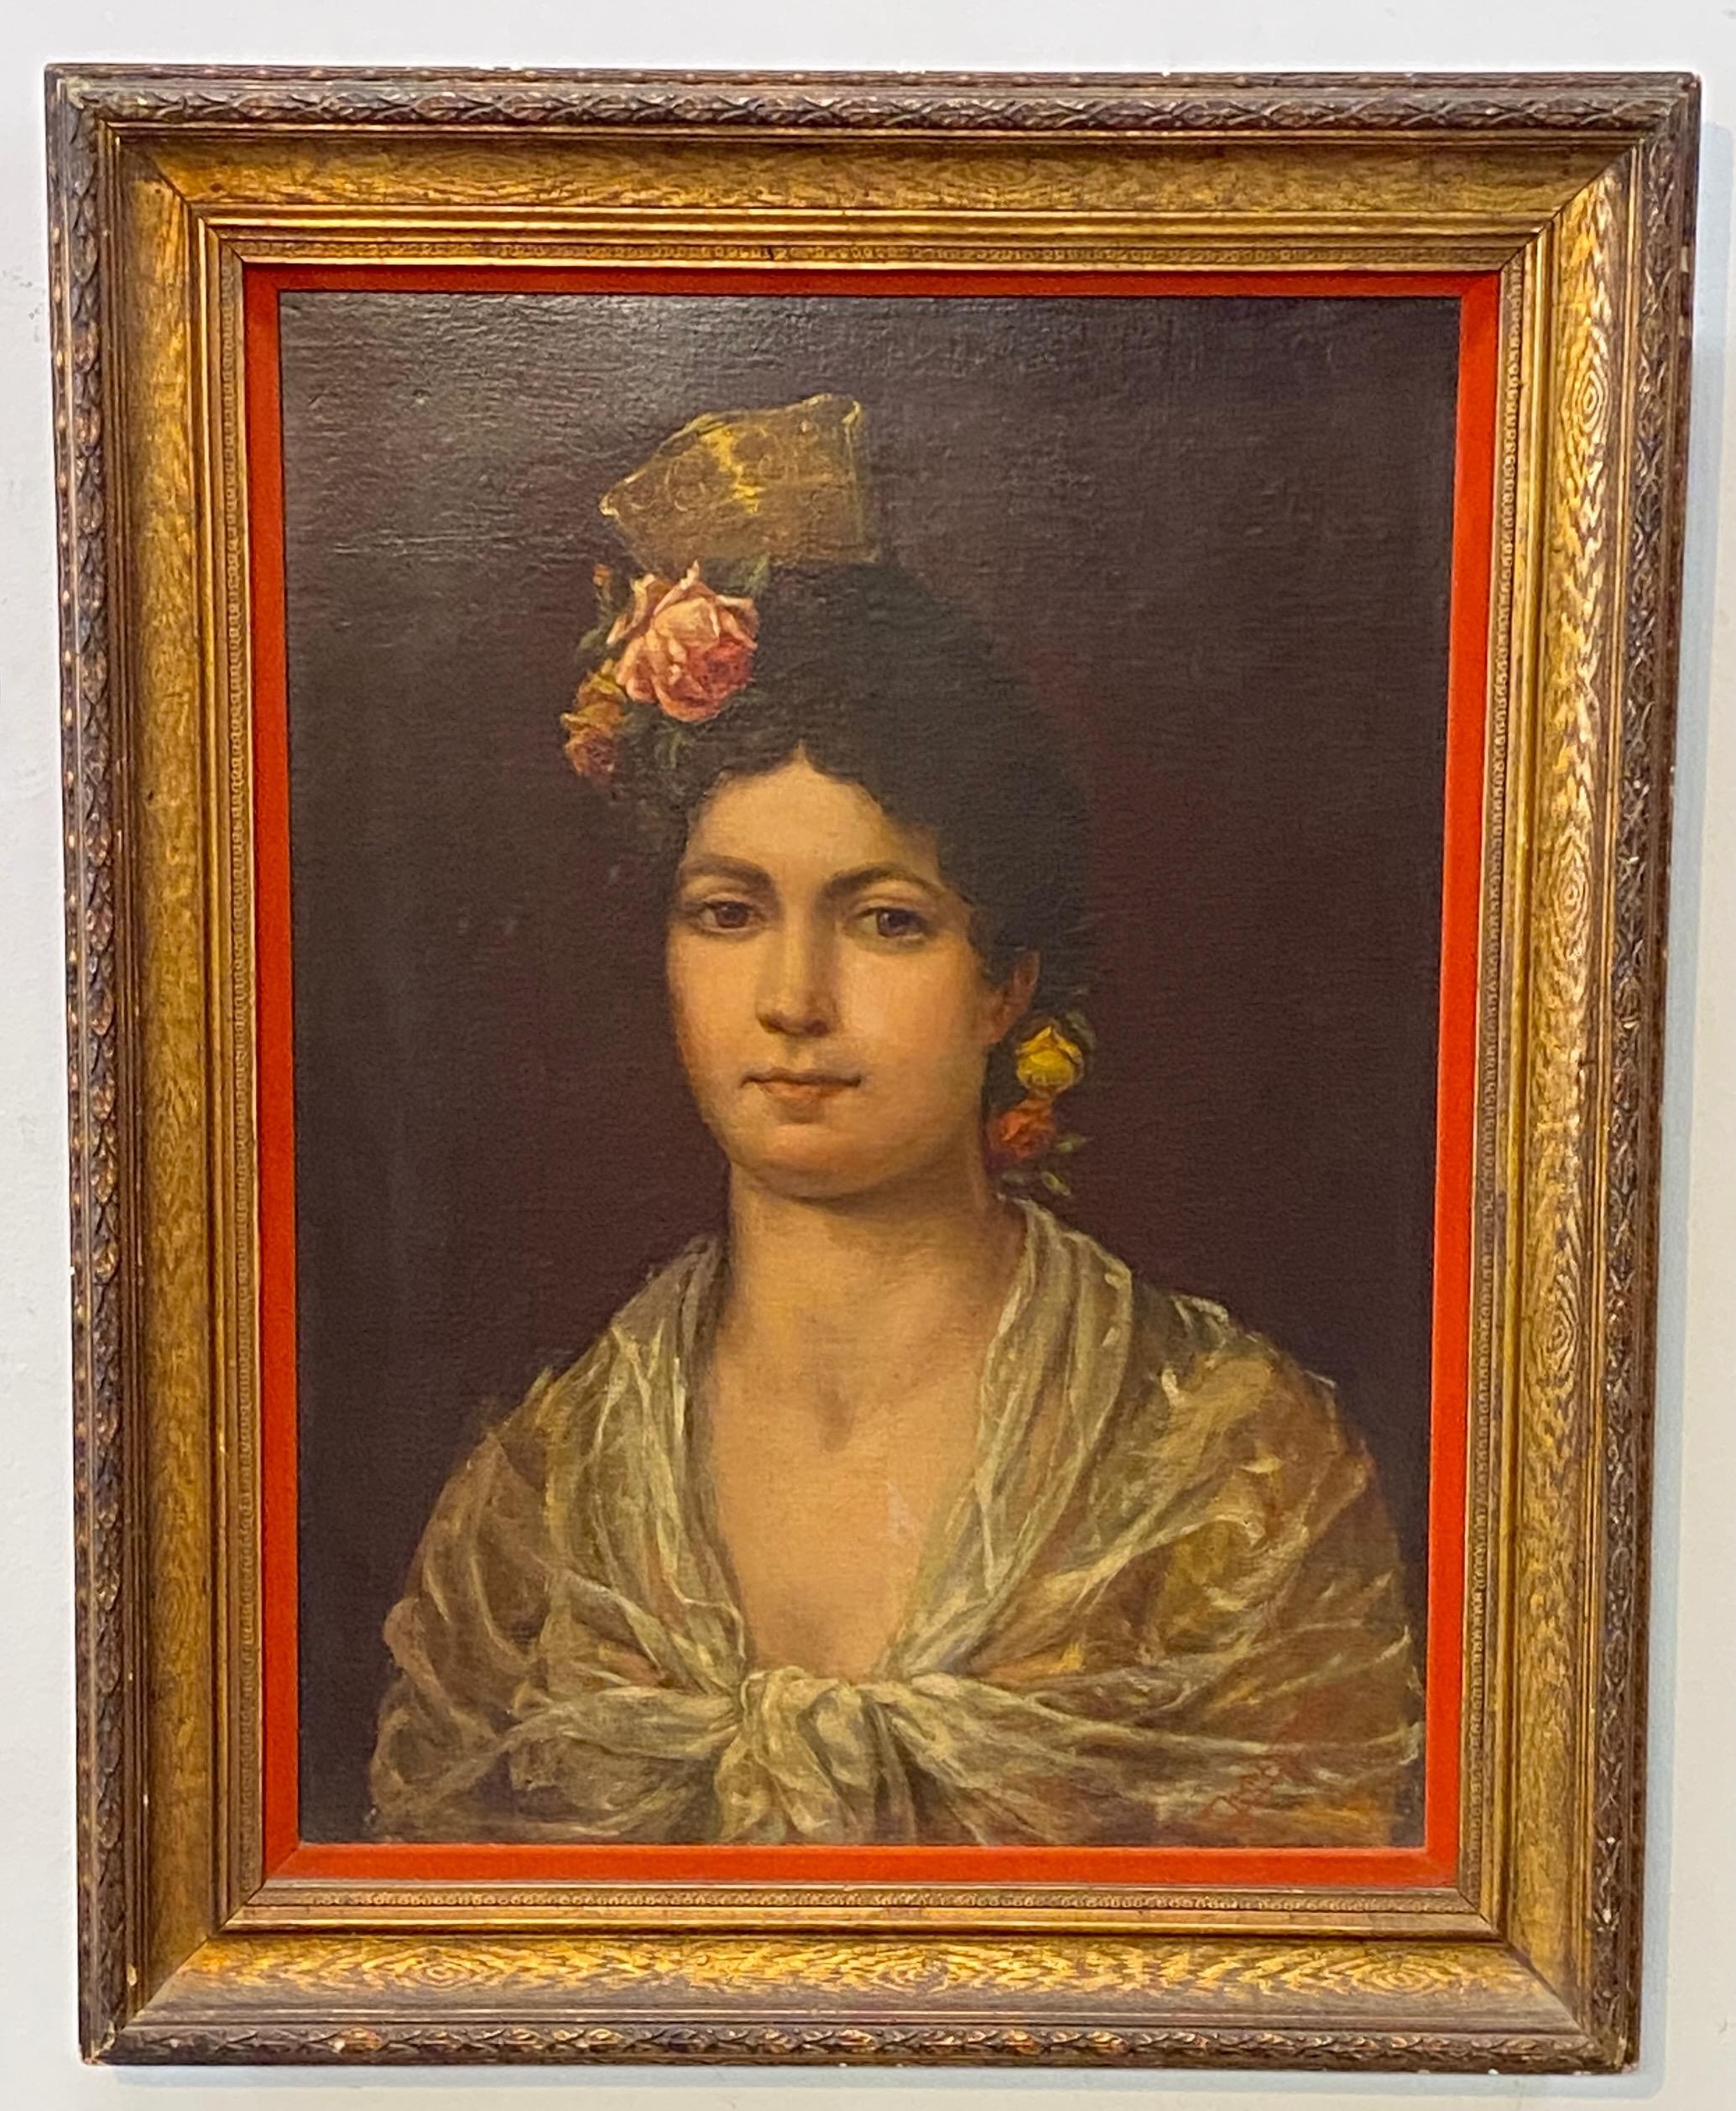 Beautifully painted portrait of a young Spanish woman. Signed lower right, but signature indistinct.
Oil on canvas (canvas was re-lined some time ago), gilt frame is early 20th century with an orange velvet liner.
European, early 20th century.